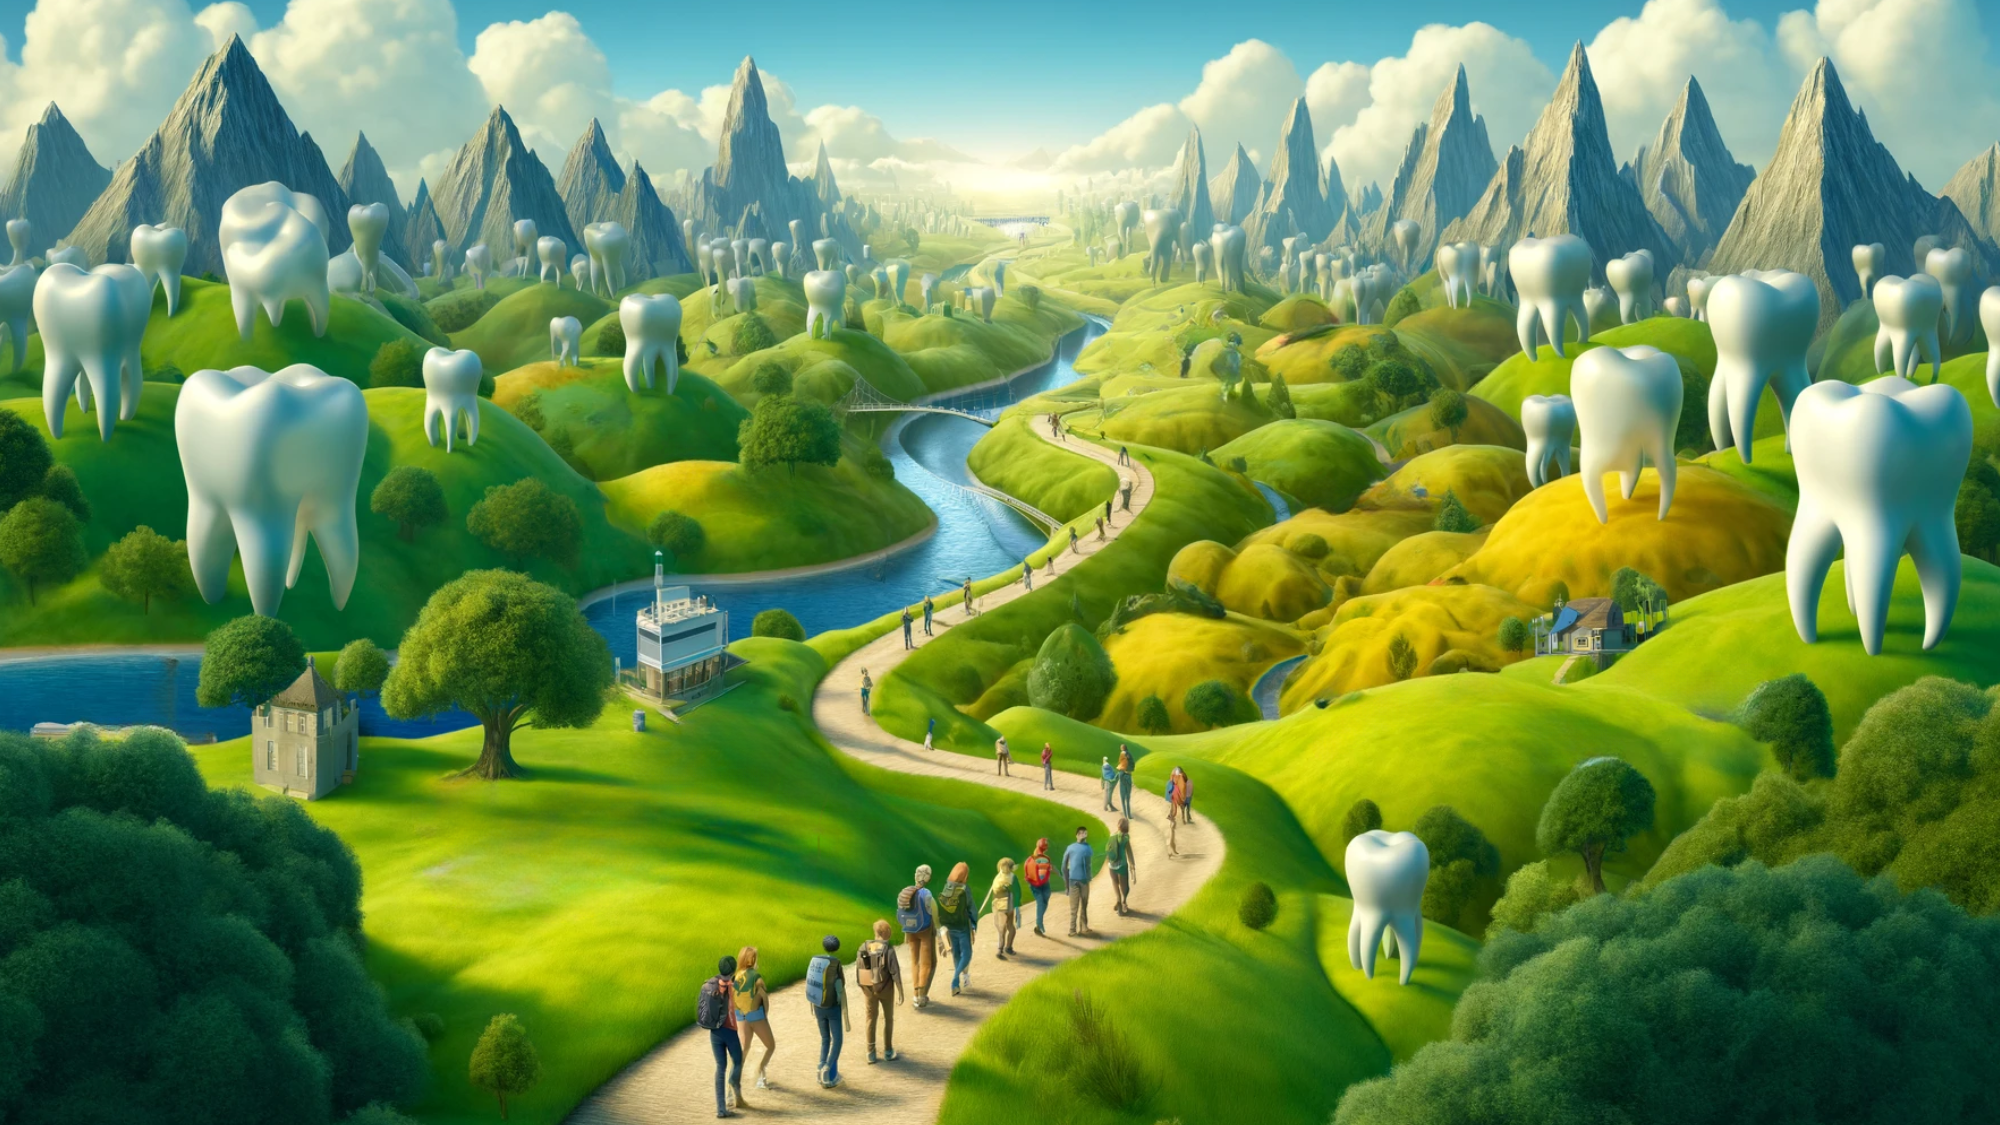 "Fantasy landscape with tooth-shaped mountains and a path leading a group through dental-themed scenery."